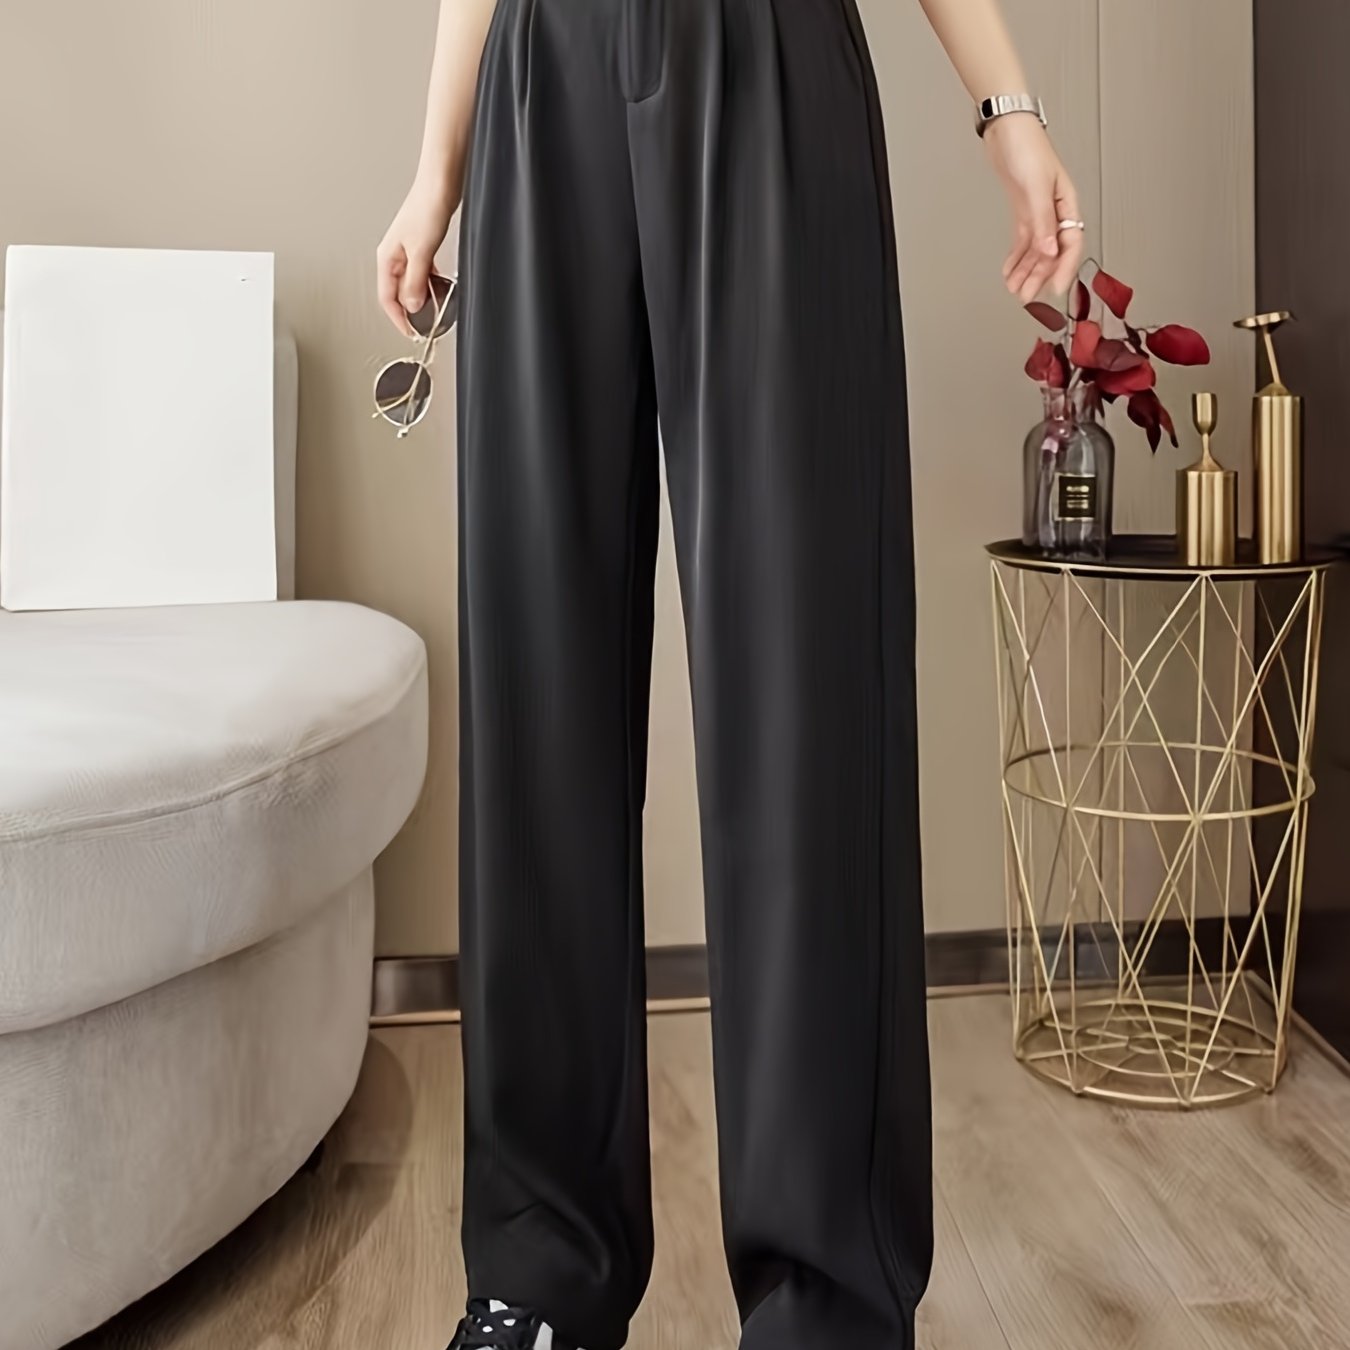 Buy New Woman's Casual Full-Length Loose Pants - Solid High Waist